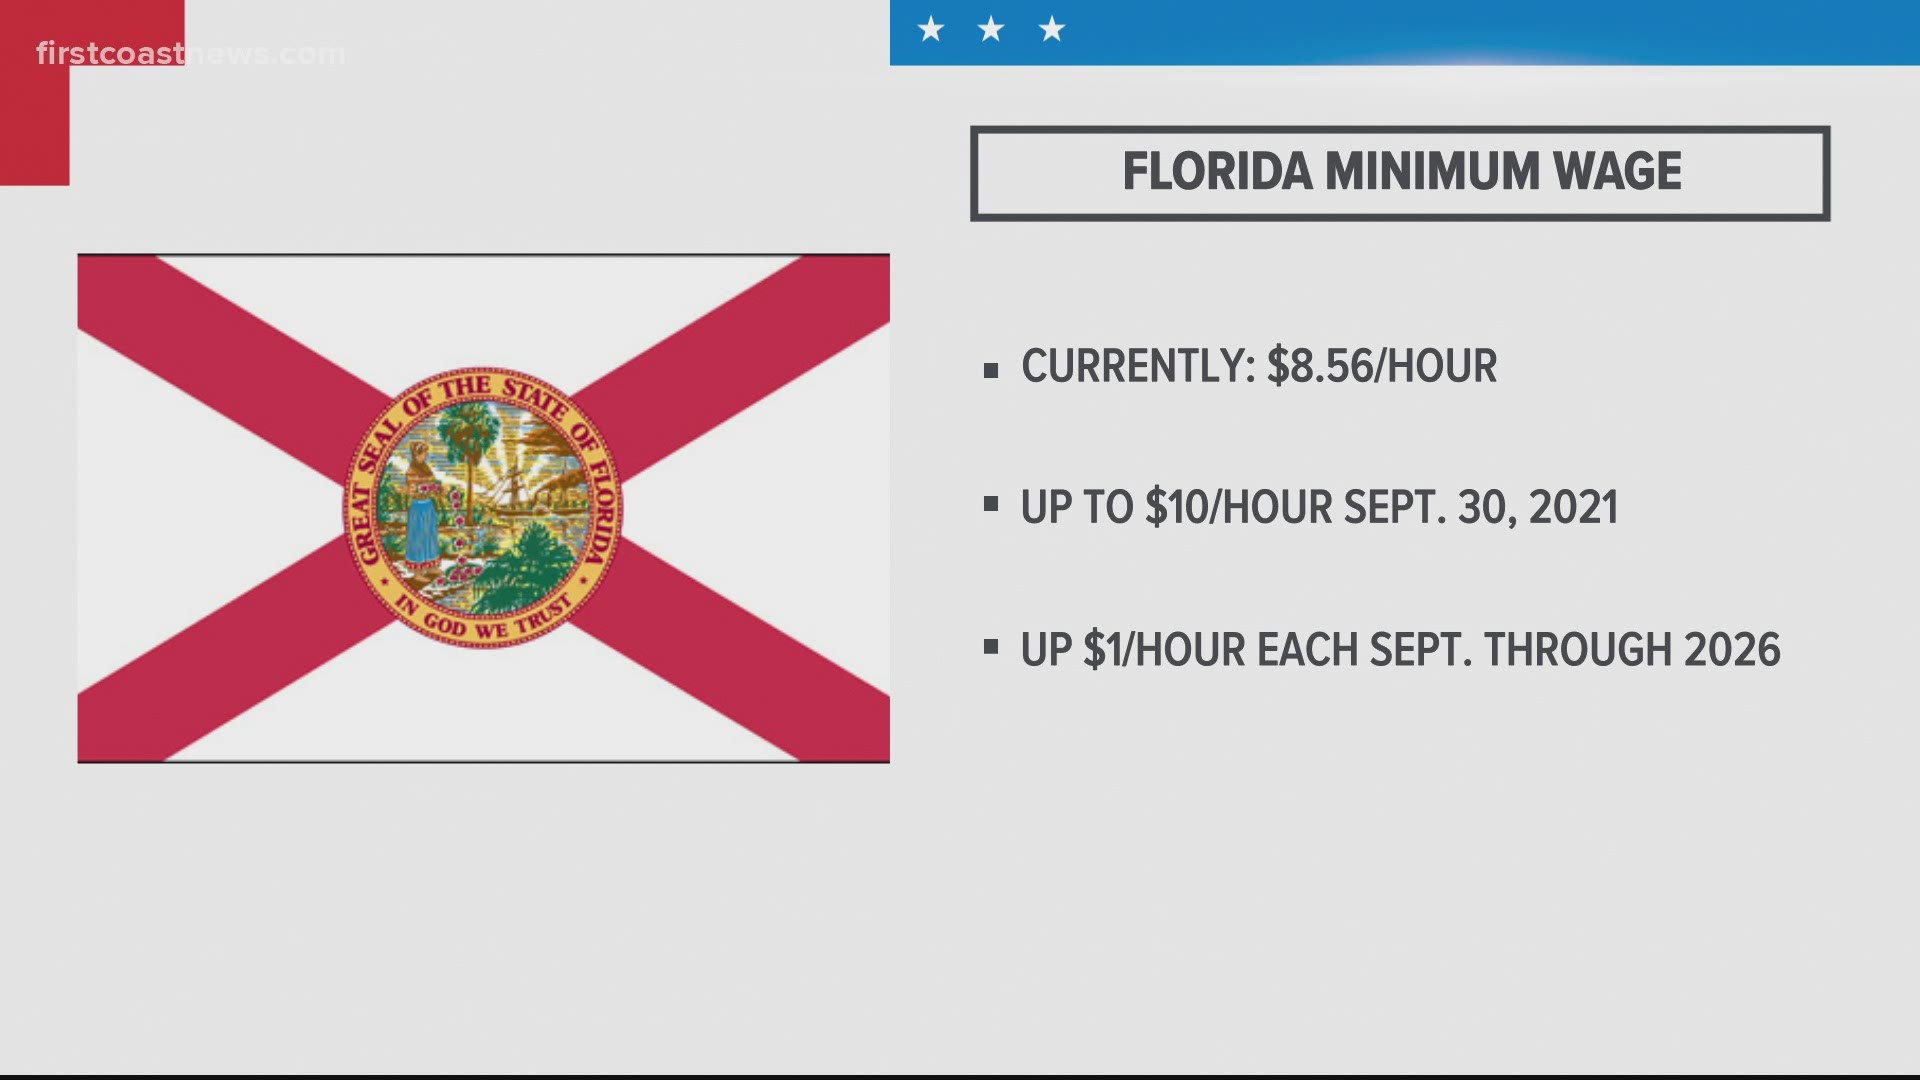 FL voters approve increasing minimum wage to 15 an hour by 2026